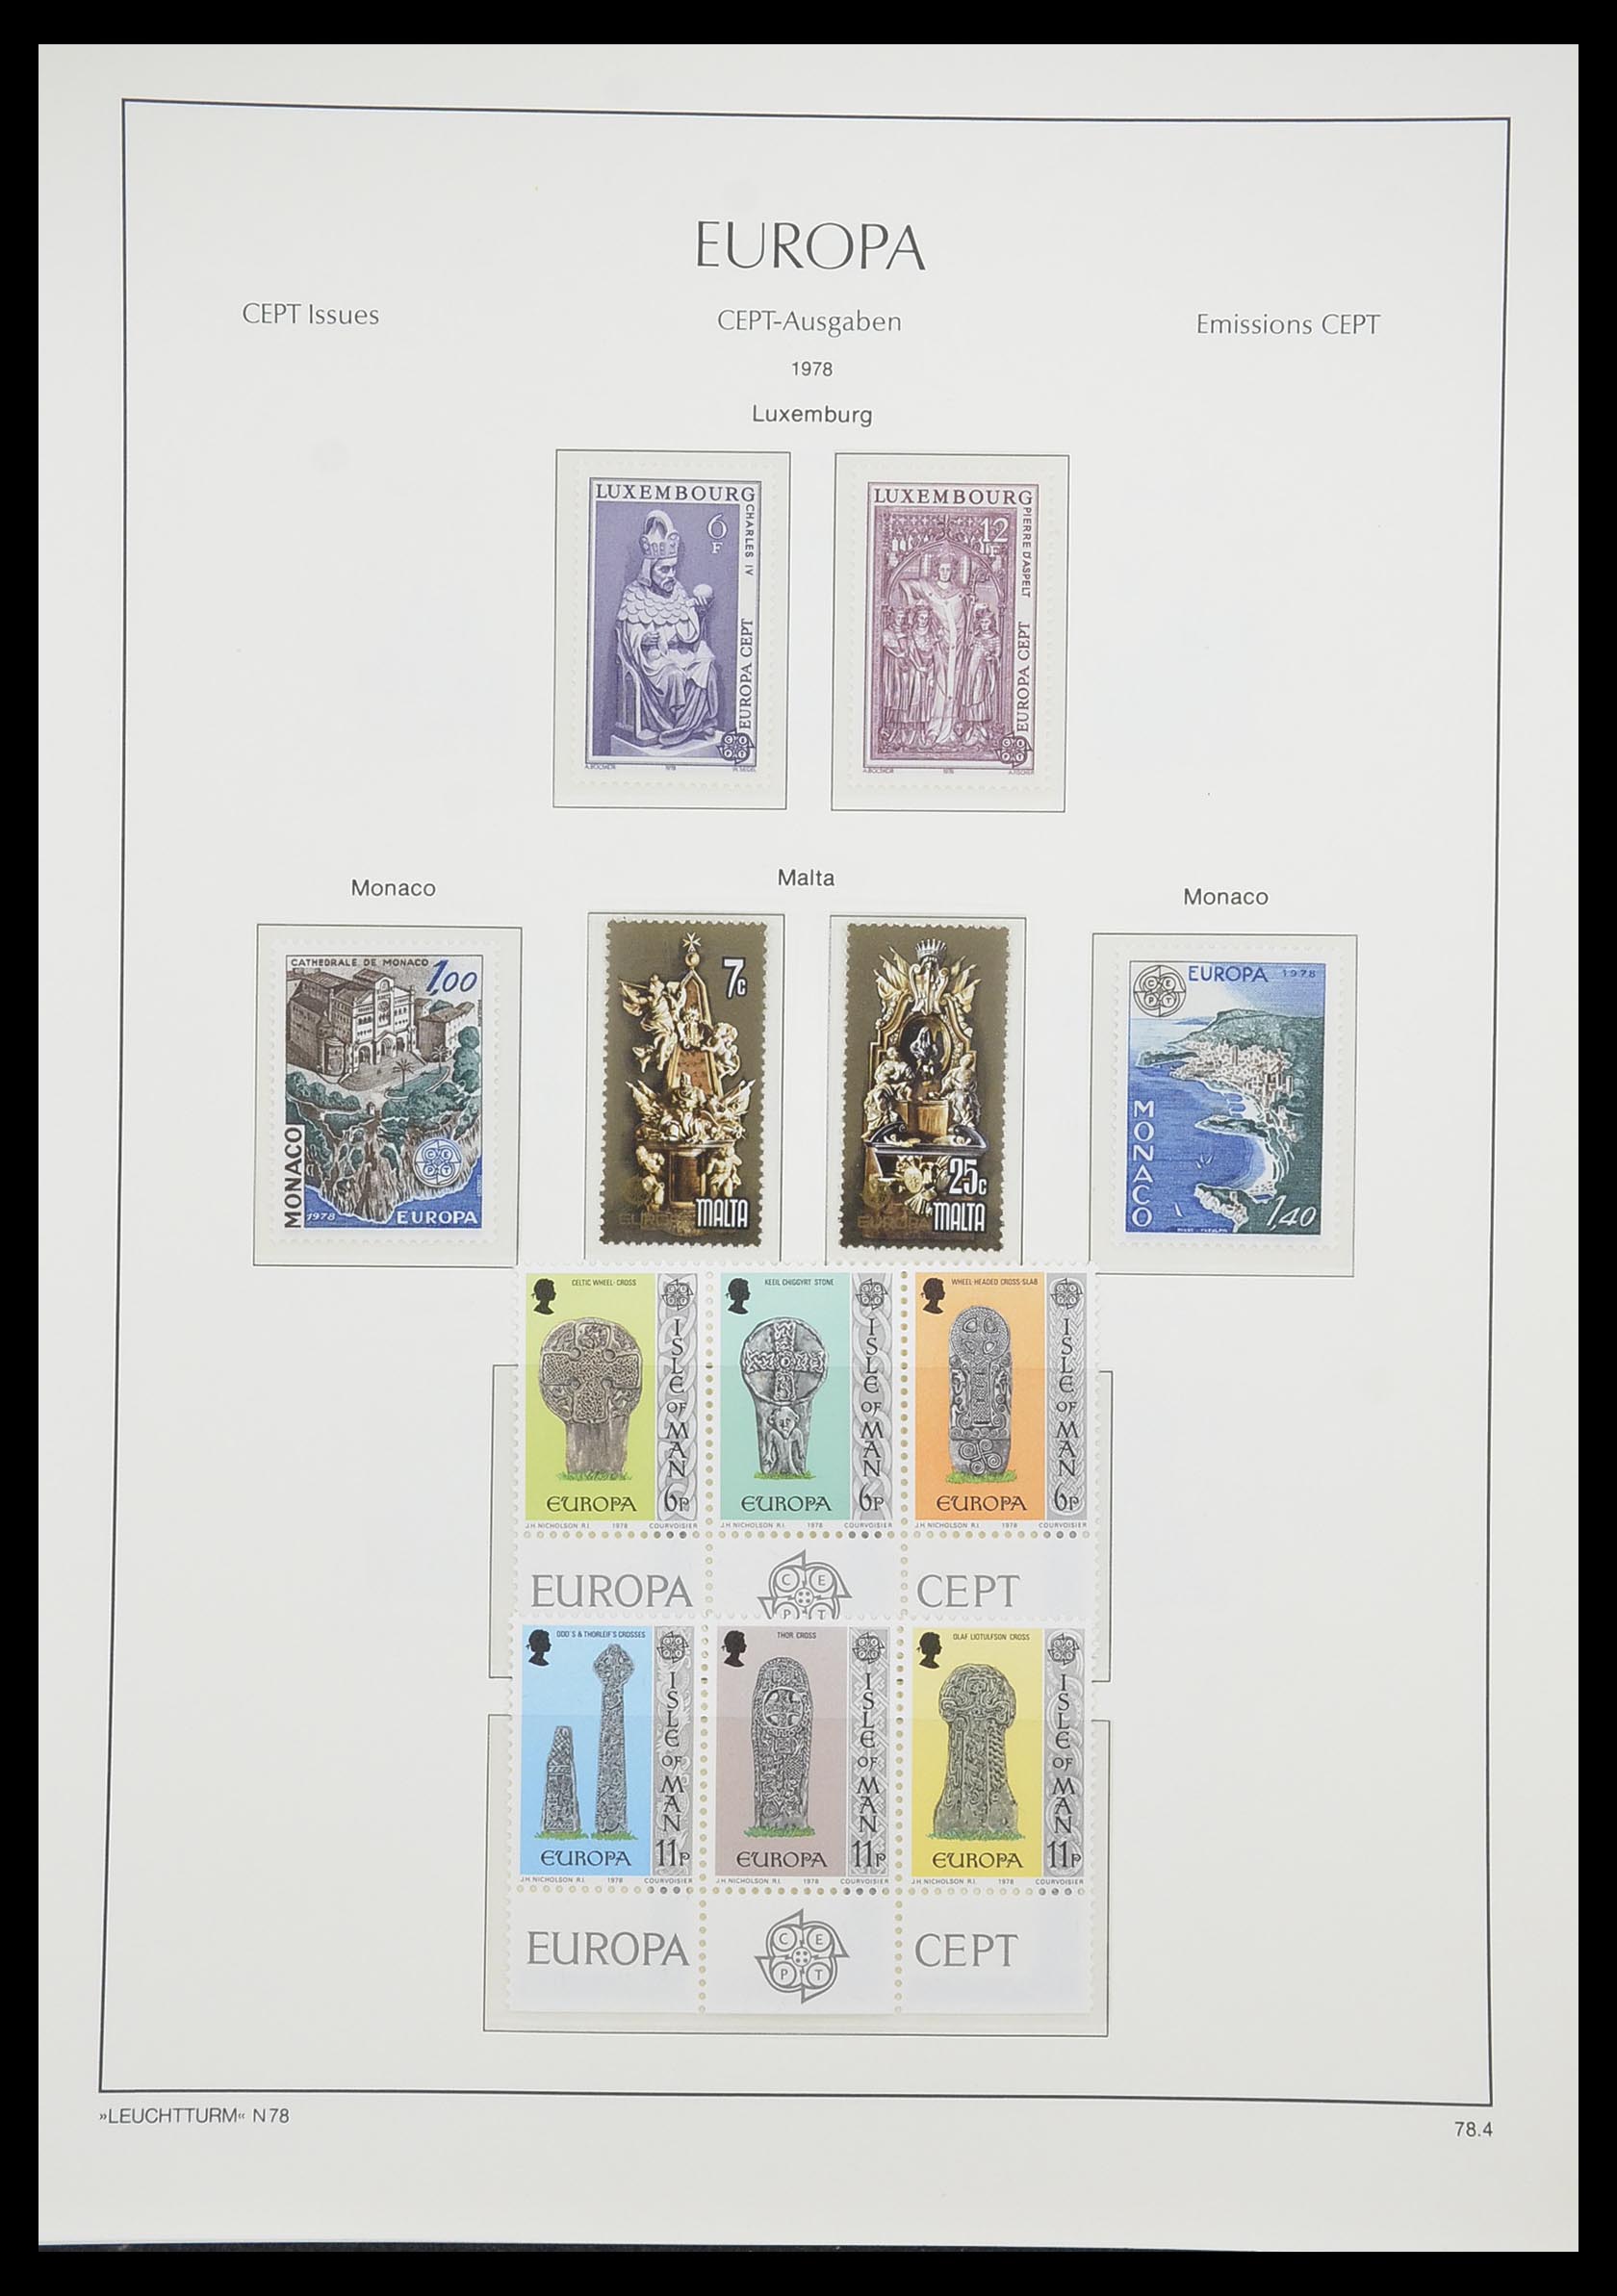 33339 093 - Stamp collection 33339 Europa CEPT 1956-1990.